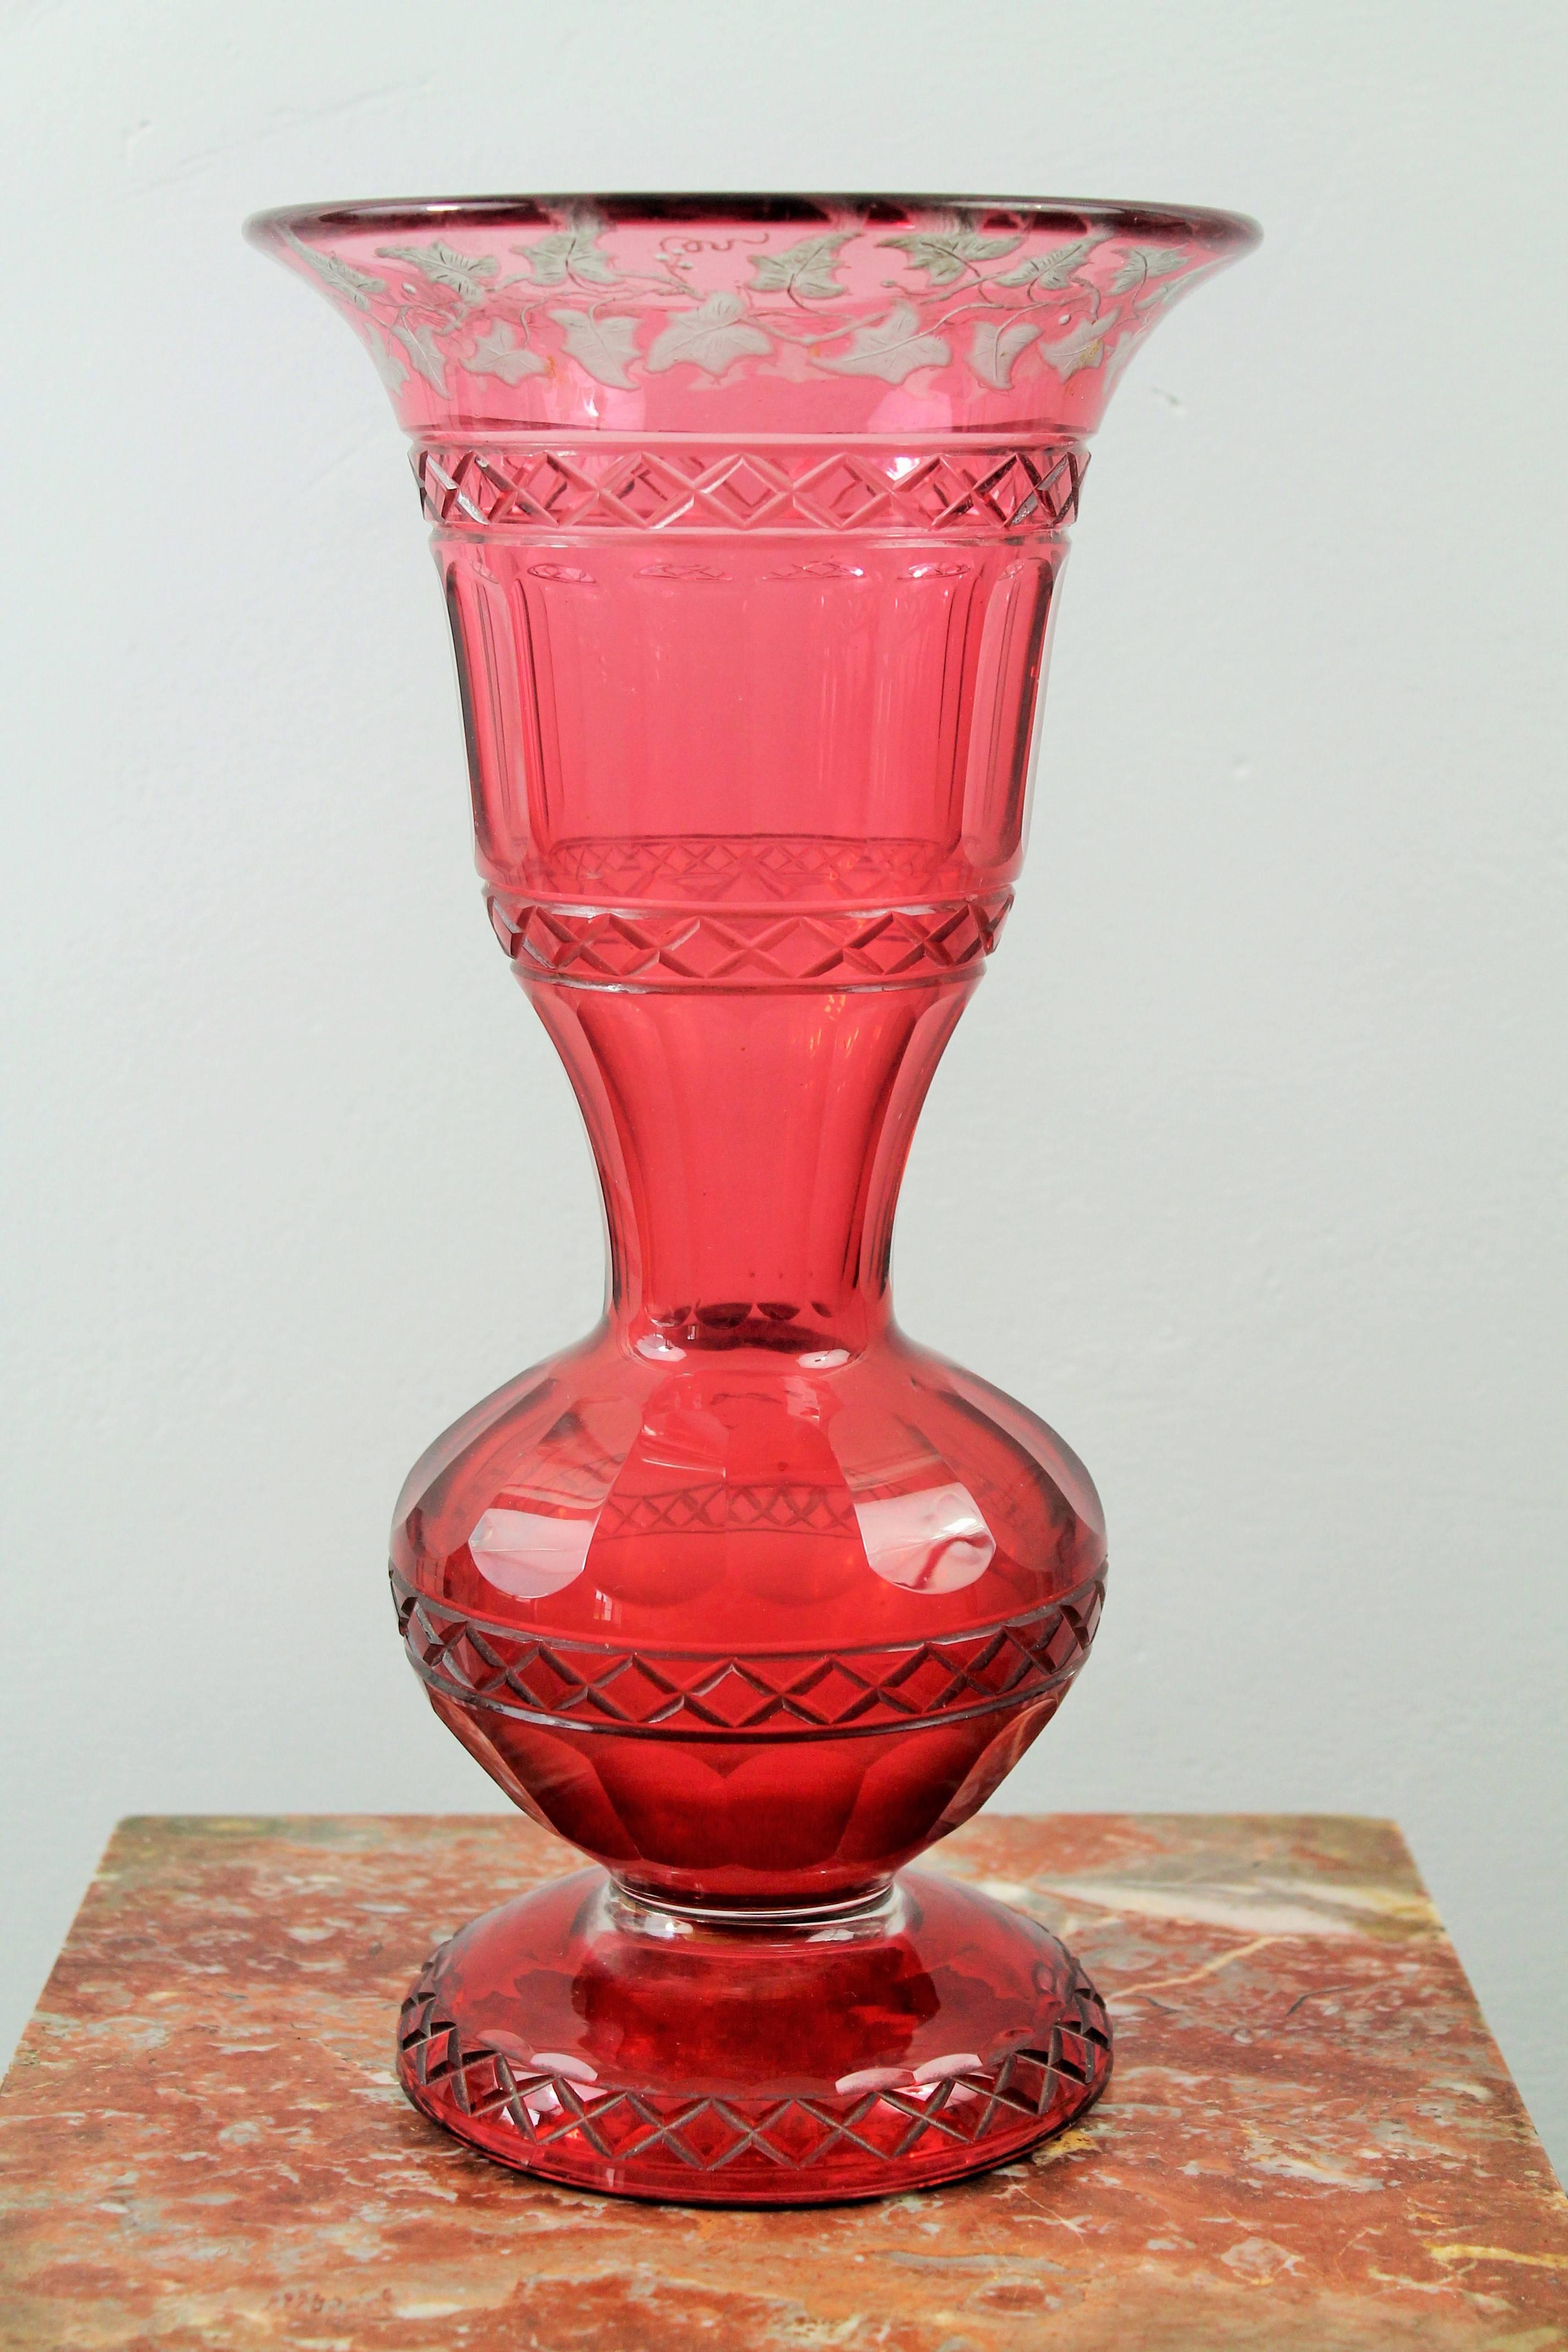 Red Boheme Crystal Vase cup Decorated with Grape Leaves, 19th Century Europe 1